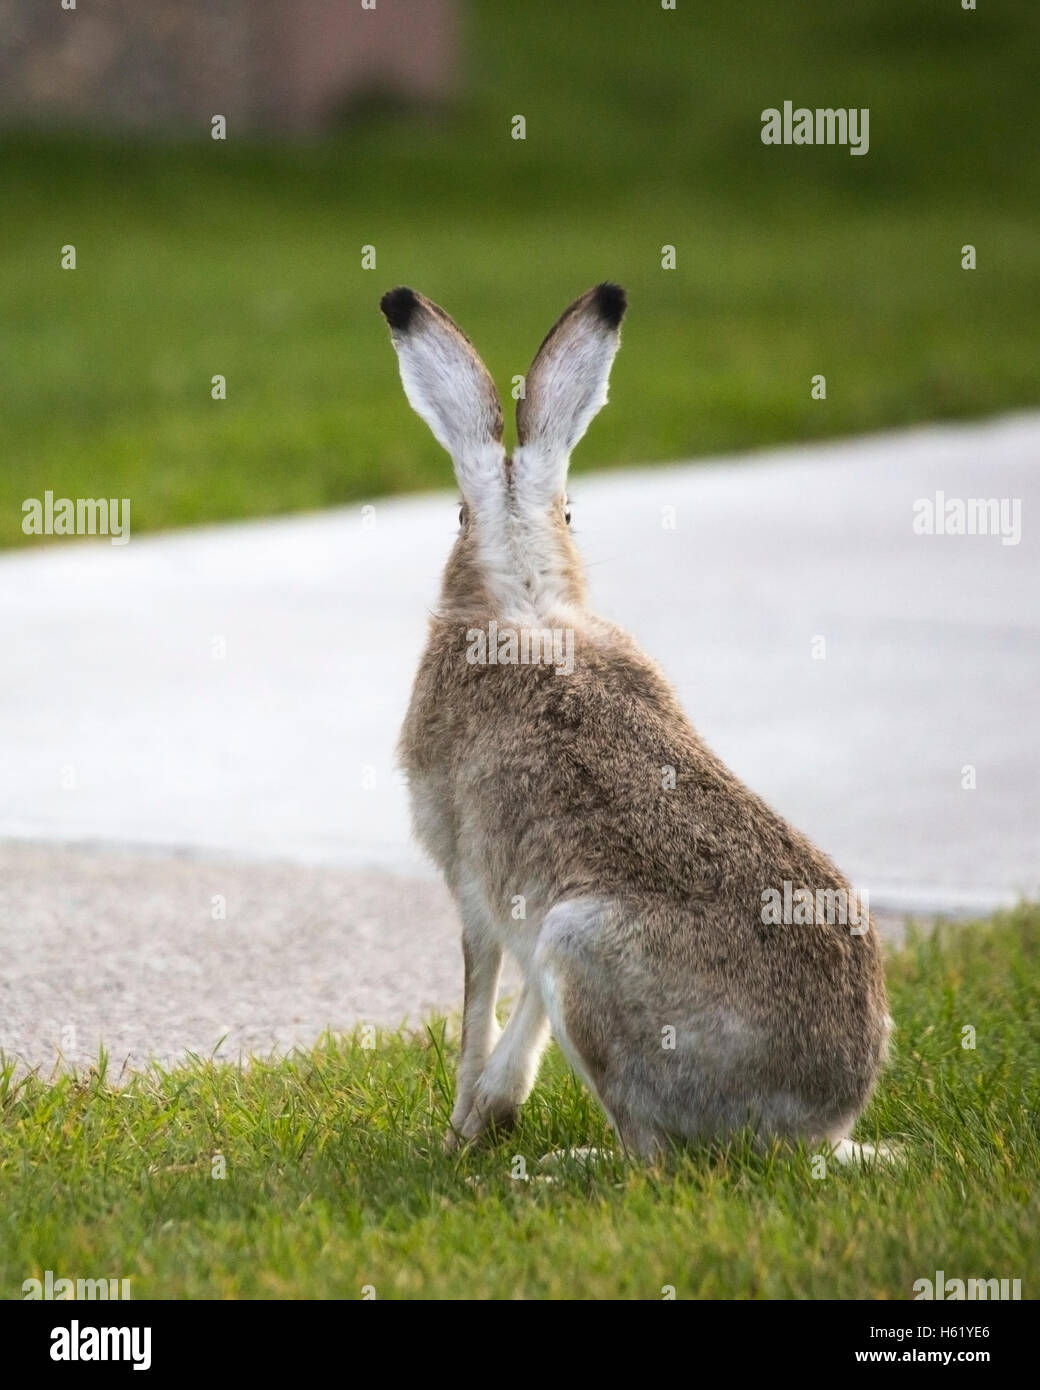 Alert White tailed Jackrabbit (Lepus townsendi), eyes on the side of the head allow vision in all directions Stock Photo